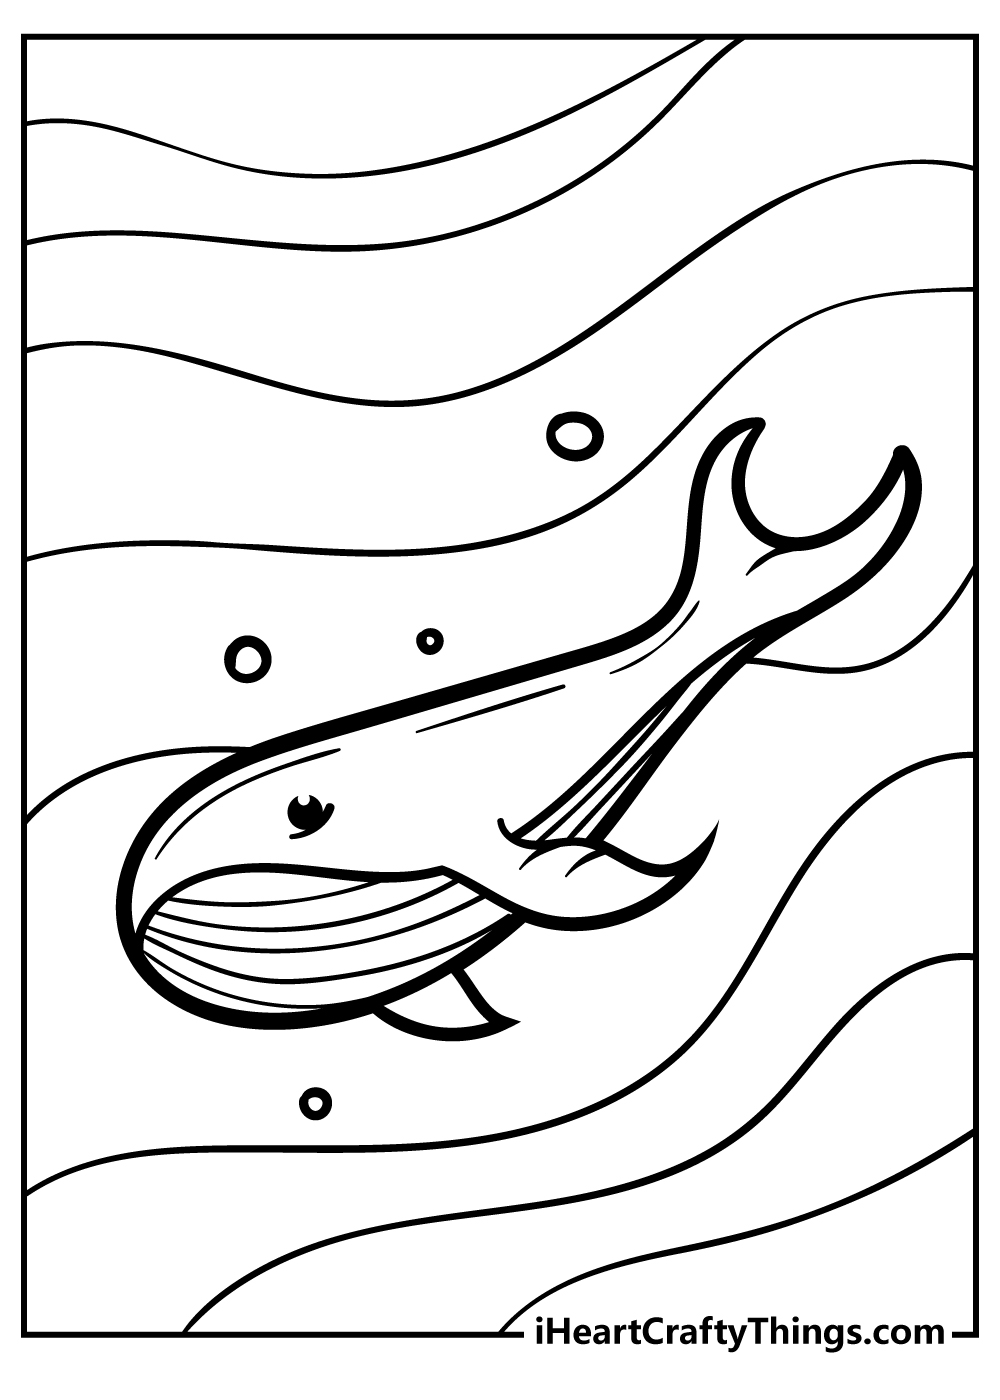 Sea Creature Coloring Book for adults free download